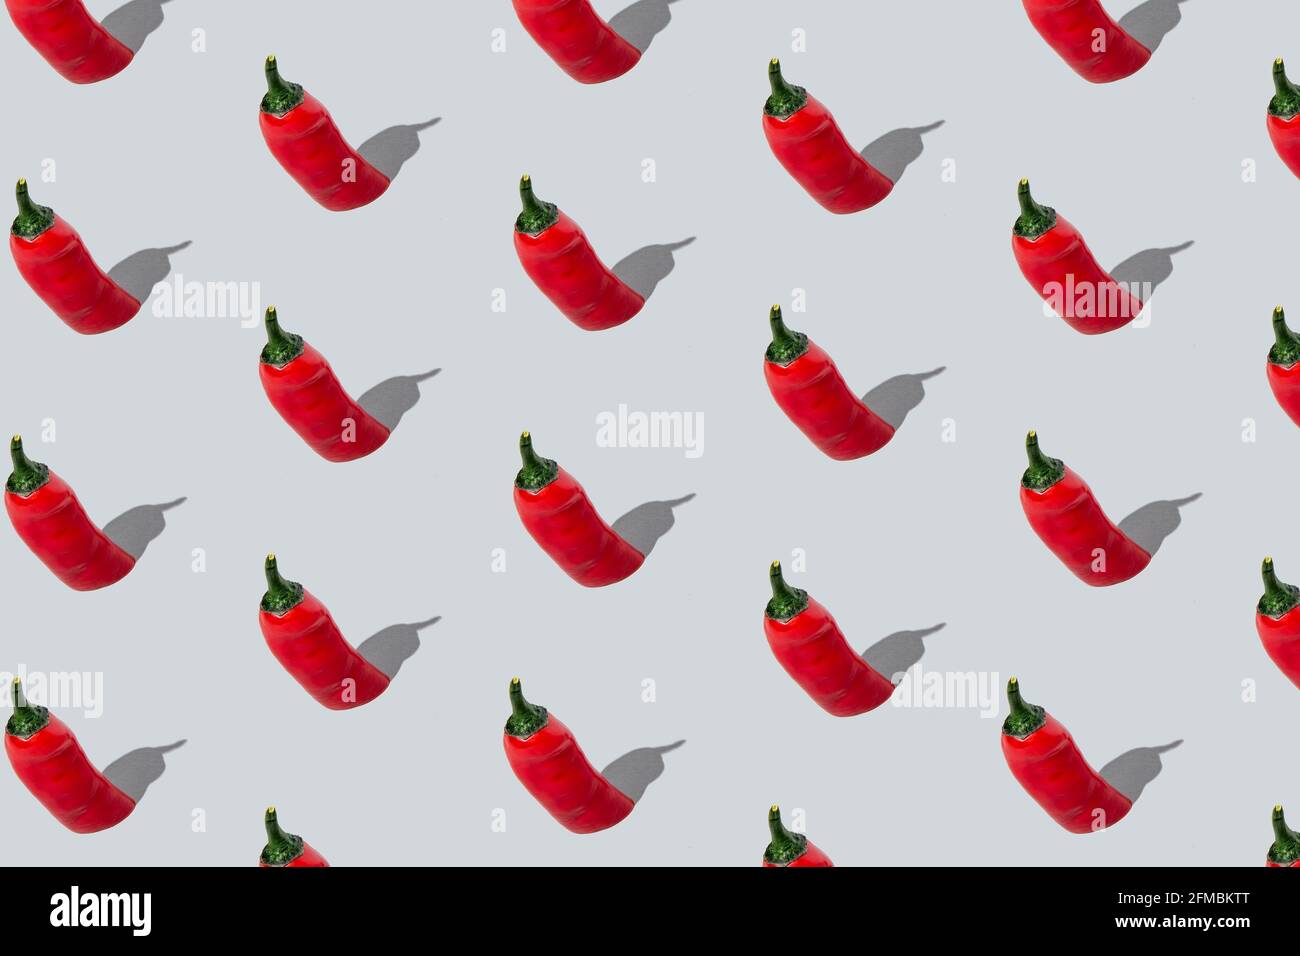 Seamless red chili peppers pattern on light grey background. Isometric layout. Stock Photo